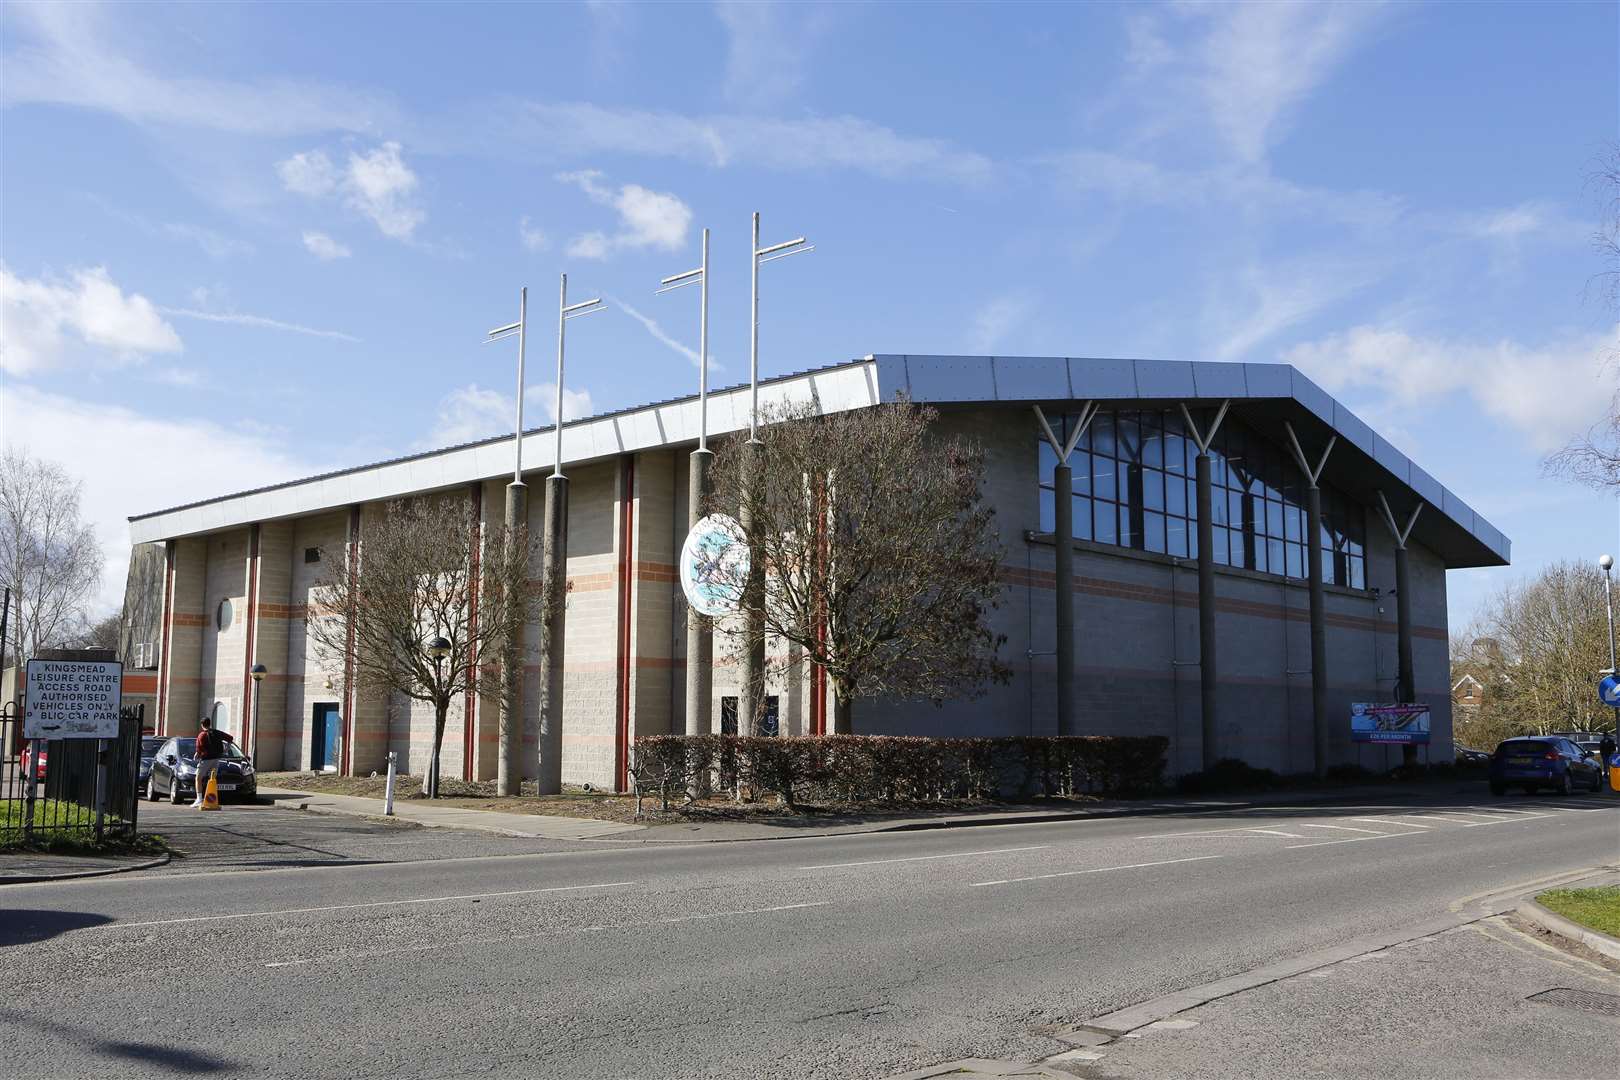 Kingsmead Leisure Centre in Canterbury